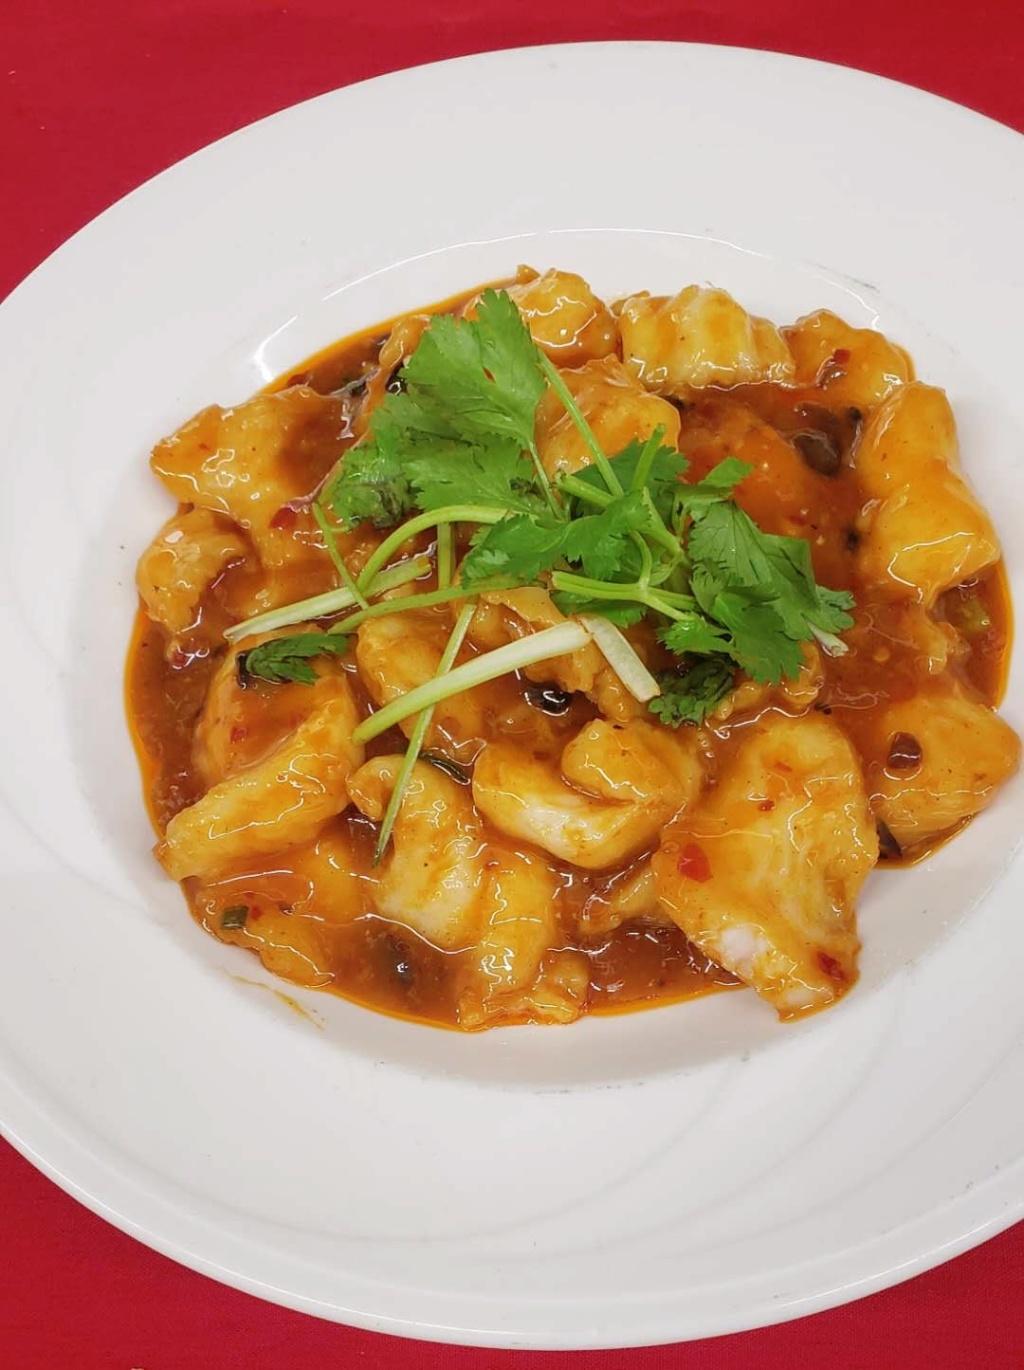 S06Sole Fish Fillet Chili Bean Sauce豆瓣鱼片